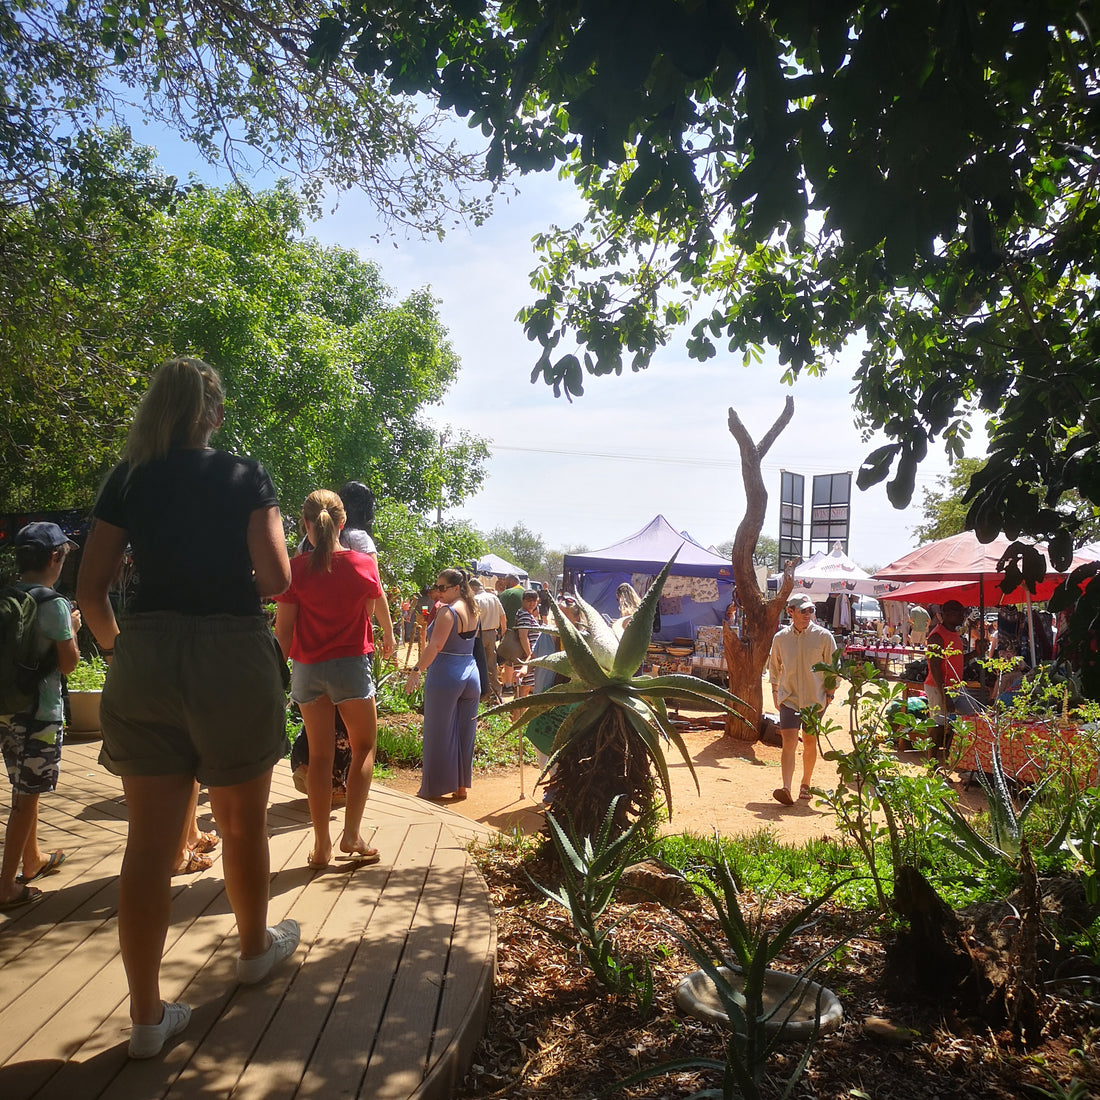 Hoedspruit Farmers market brings to you - all the shades of green